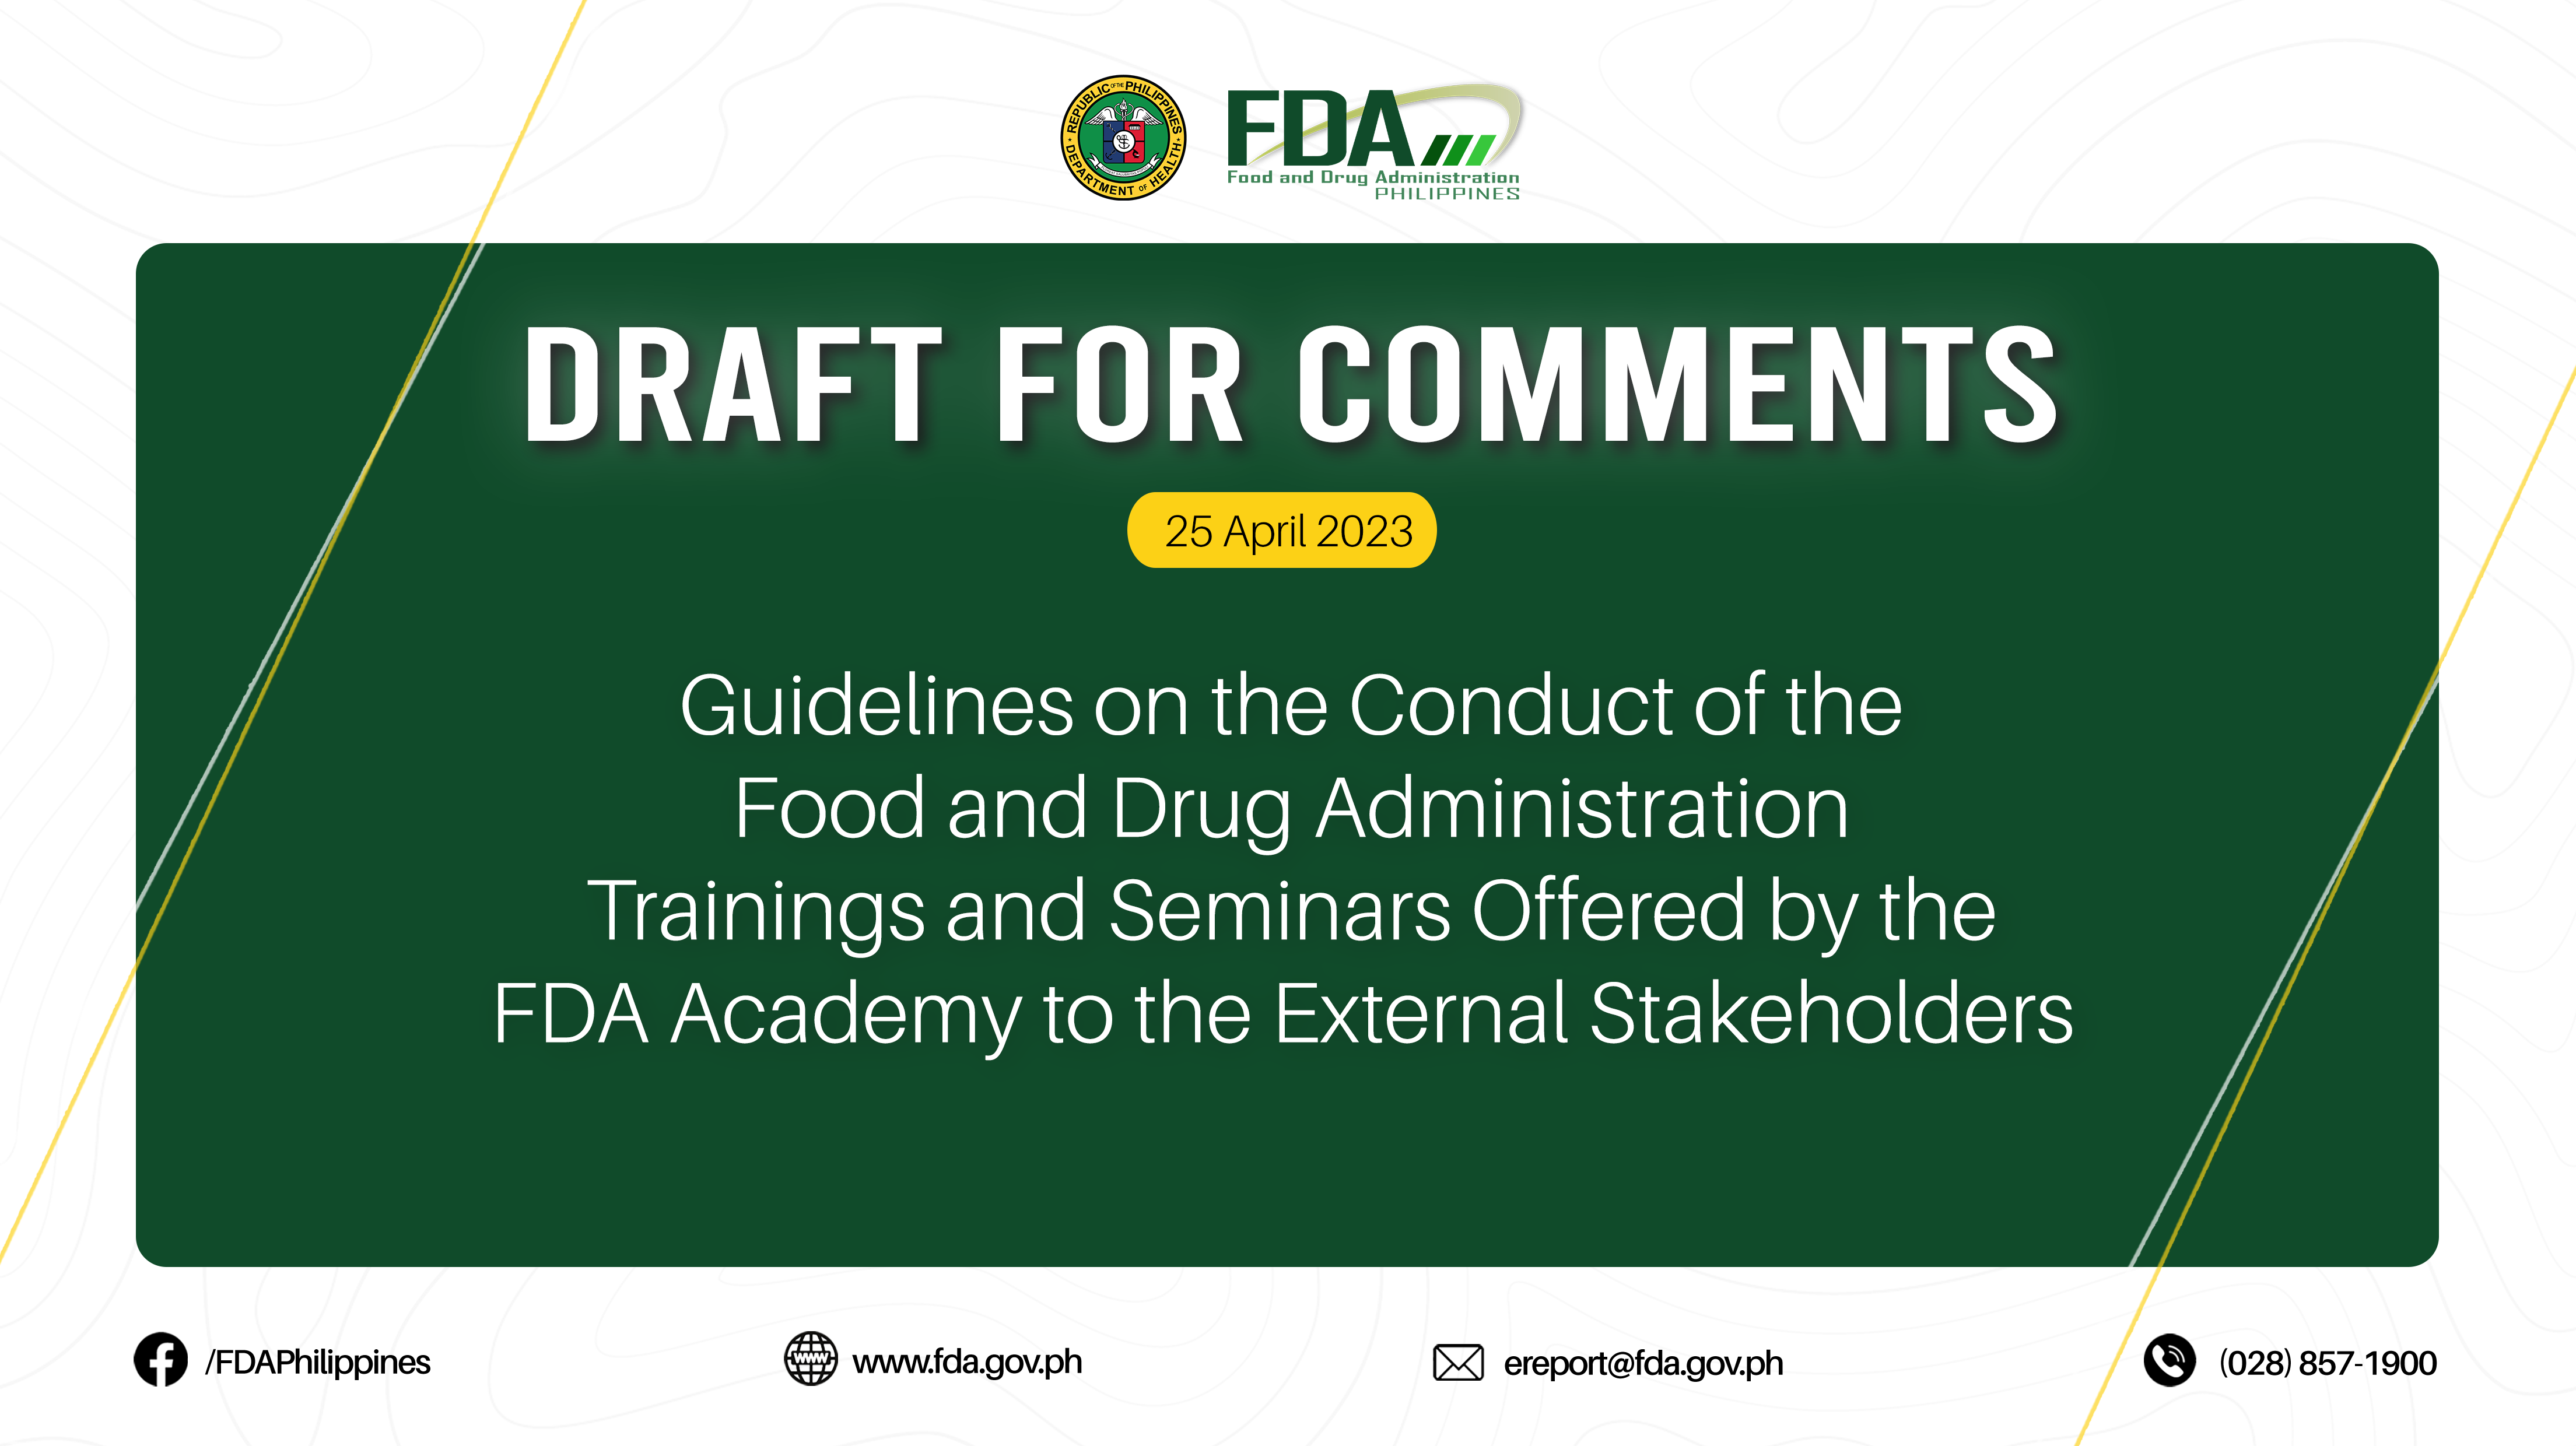 Draft for Comments || Guidelines on the Conduct of the Food and Drug Administration Trainings and Seminars Offered by the FDA Academy to the External Stakeholders